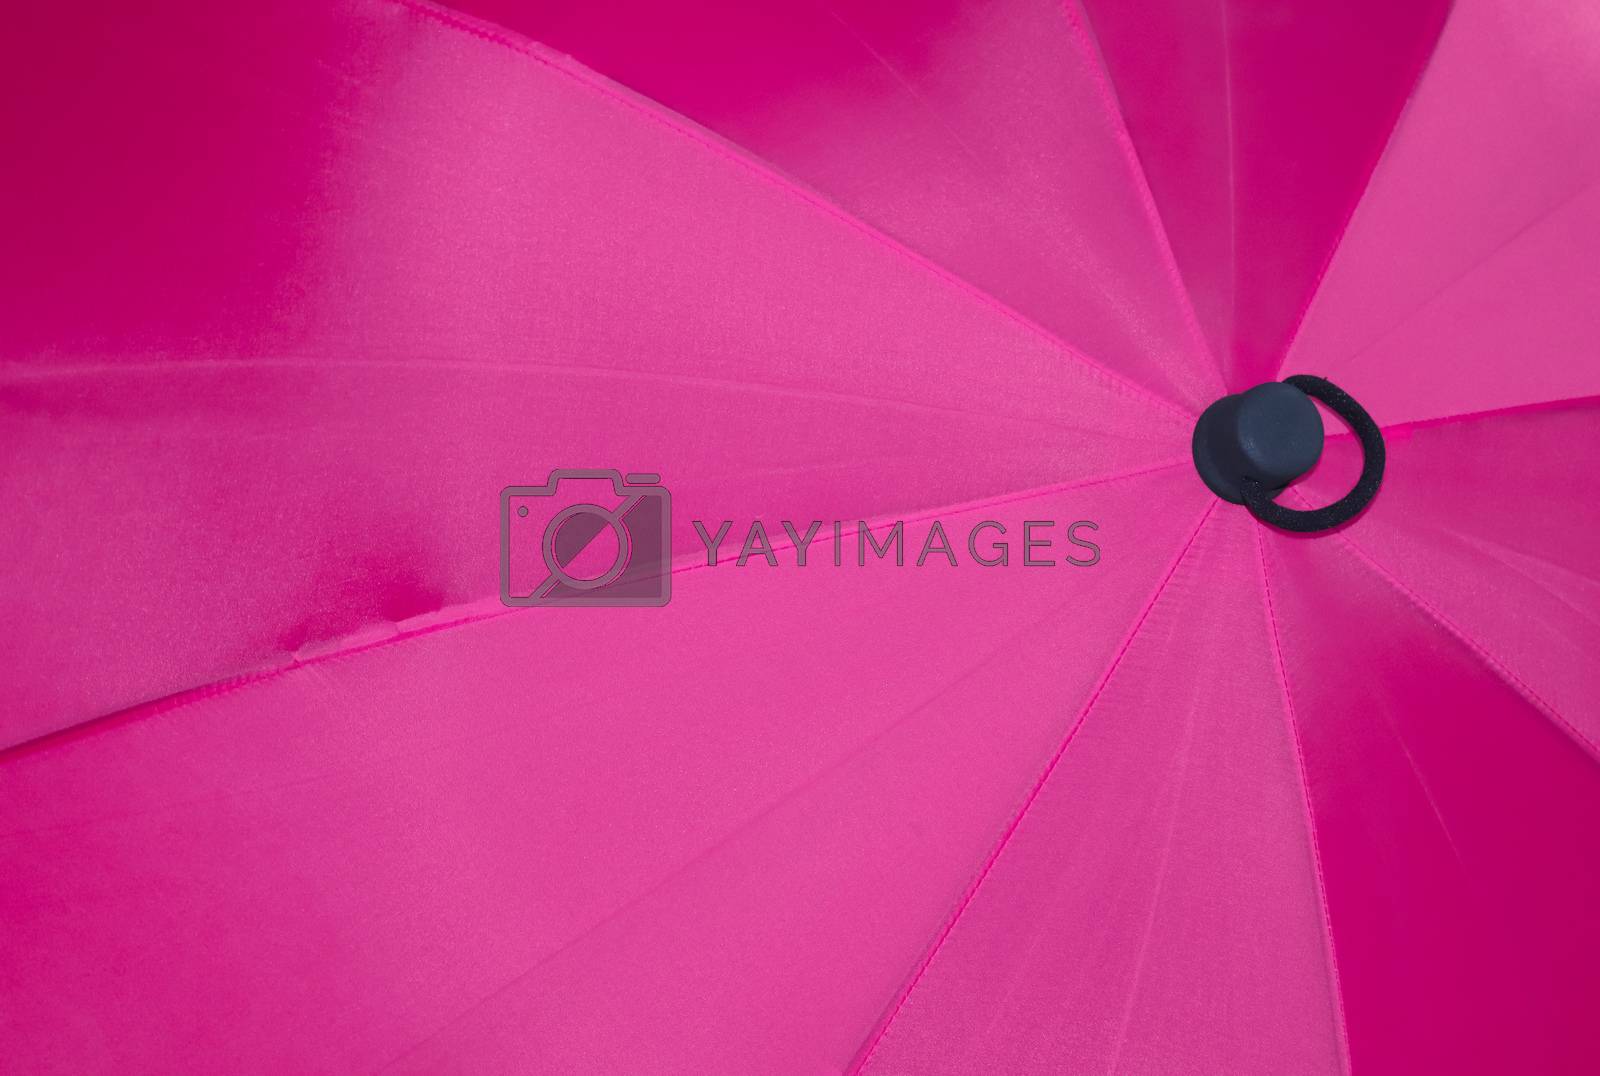 Royalty free image of Close up view at the colorful surfaces of a rainproof umbrella by MP_foto71